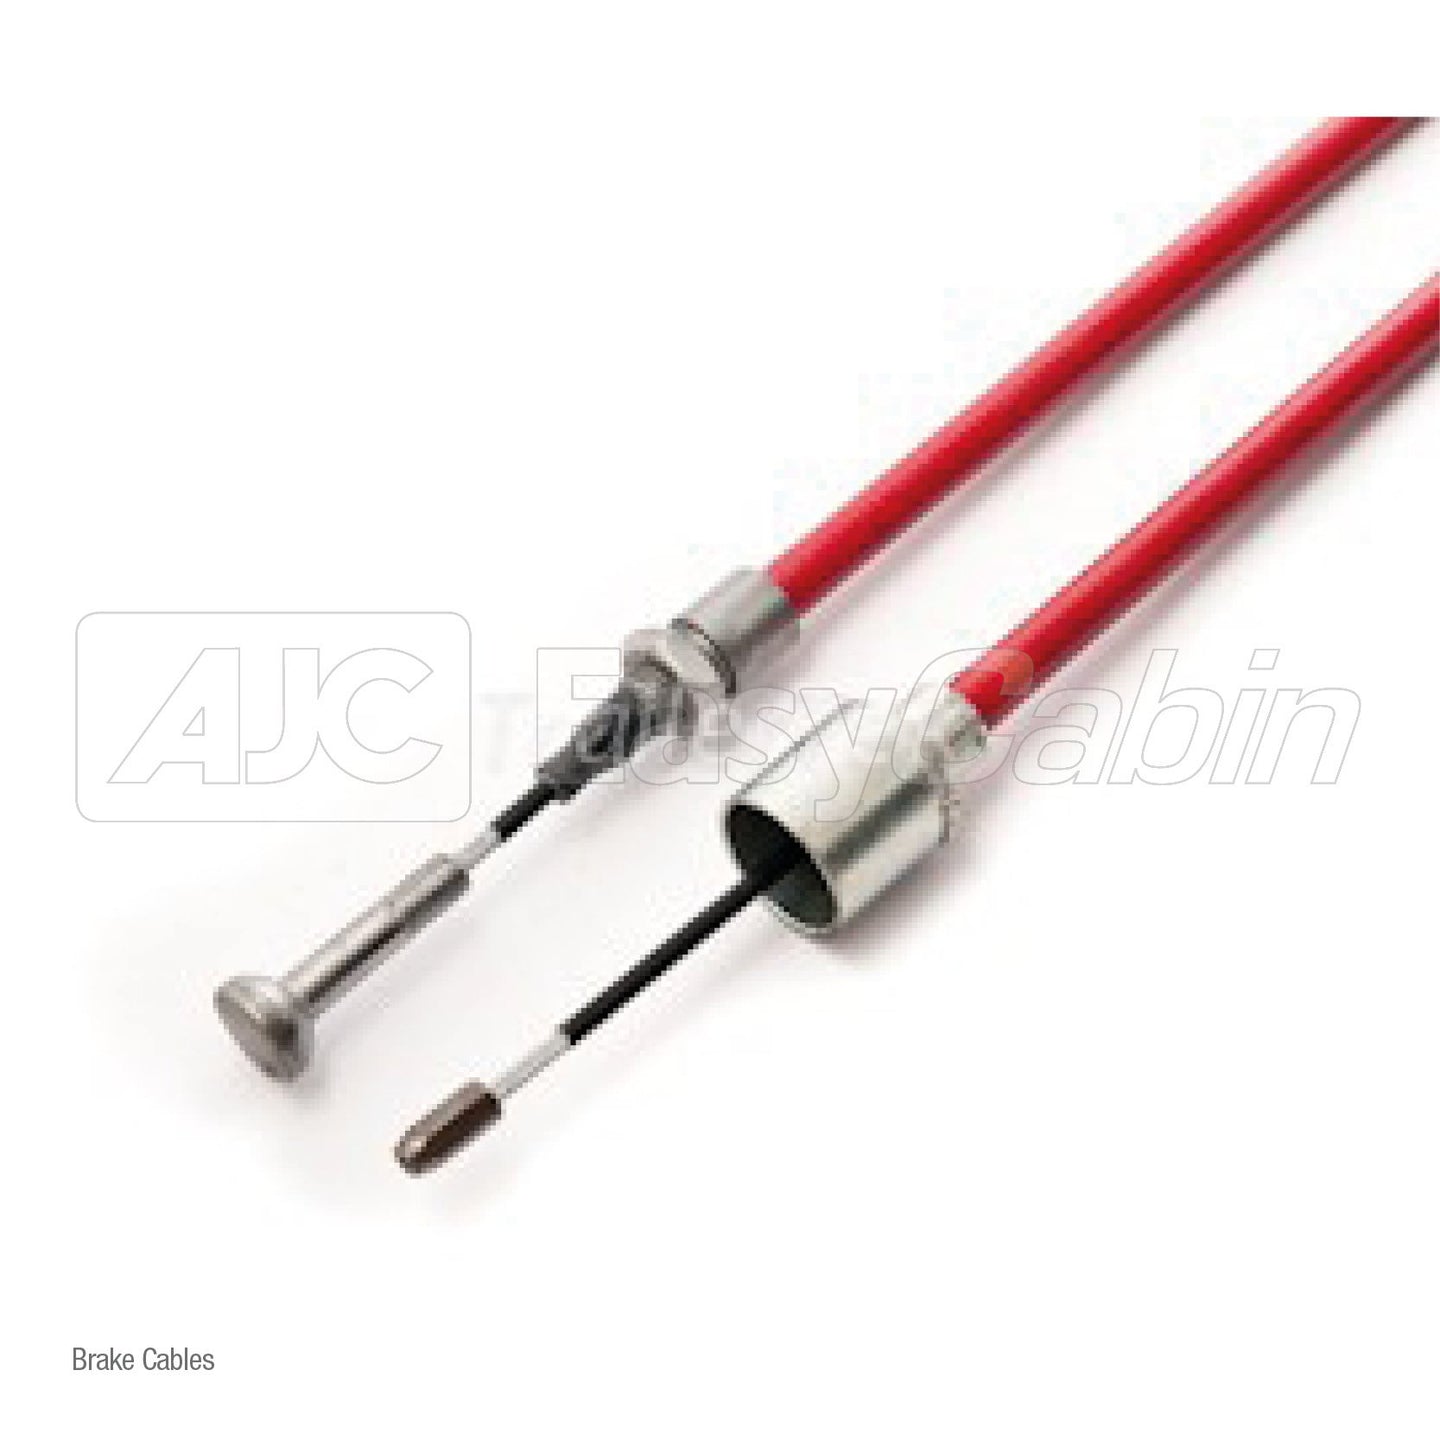 Brake Cable (247287)